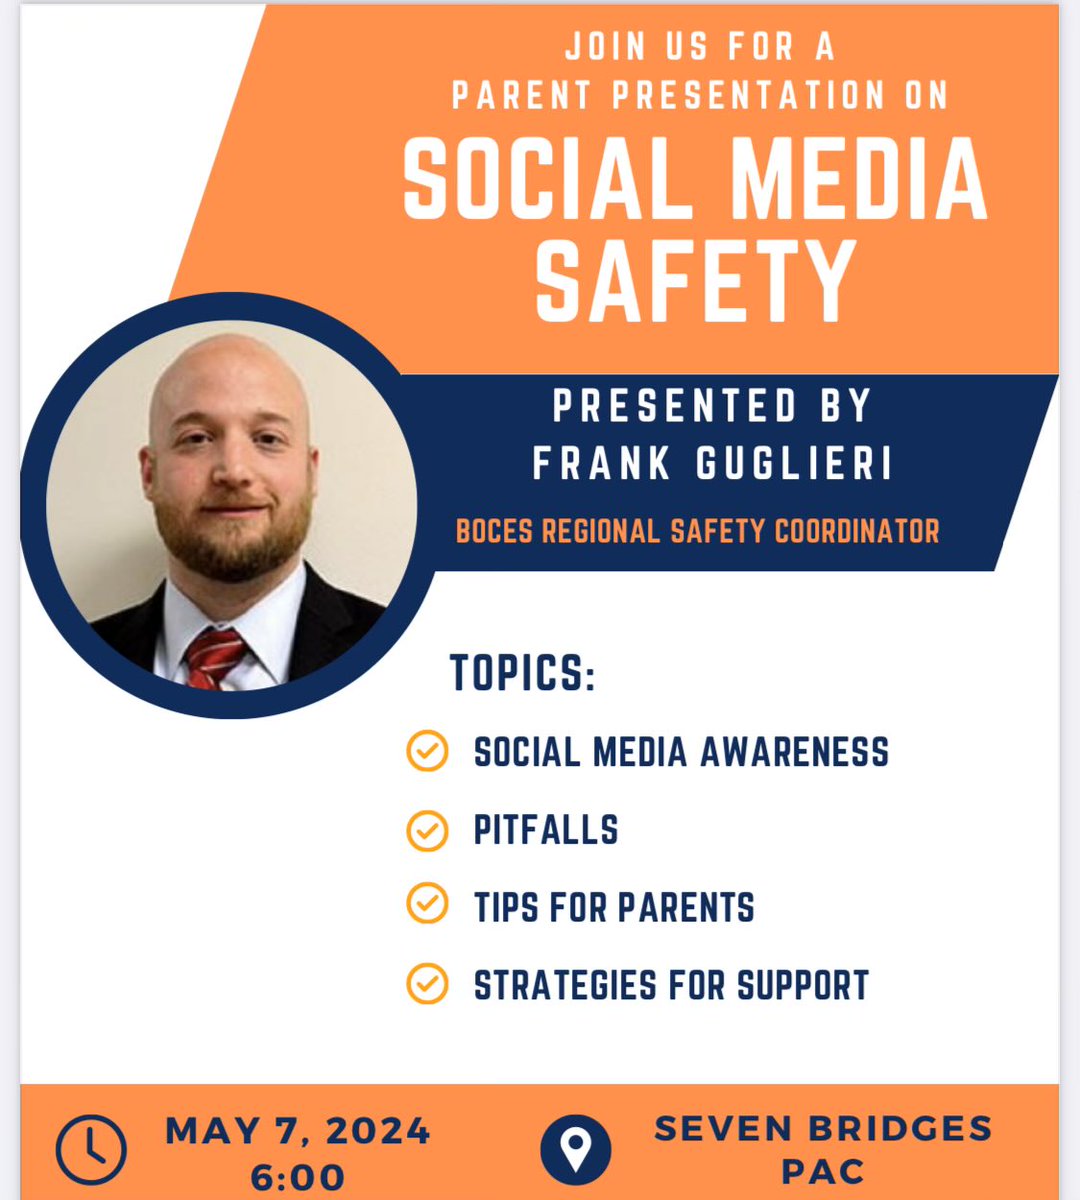 Thanks to Frank Guglieri, BOCES regional safety coordinator, for his insightful presentation tonight at 7B, addressing social media safety and other concerns for CCSD parents of 4th - 8th graders👏 #SafetyFirst #CommunityEngagement @chappaqua_csd @JessRappaport @LauralynStewar1